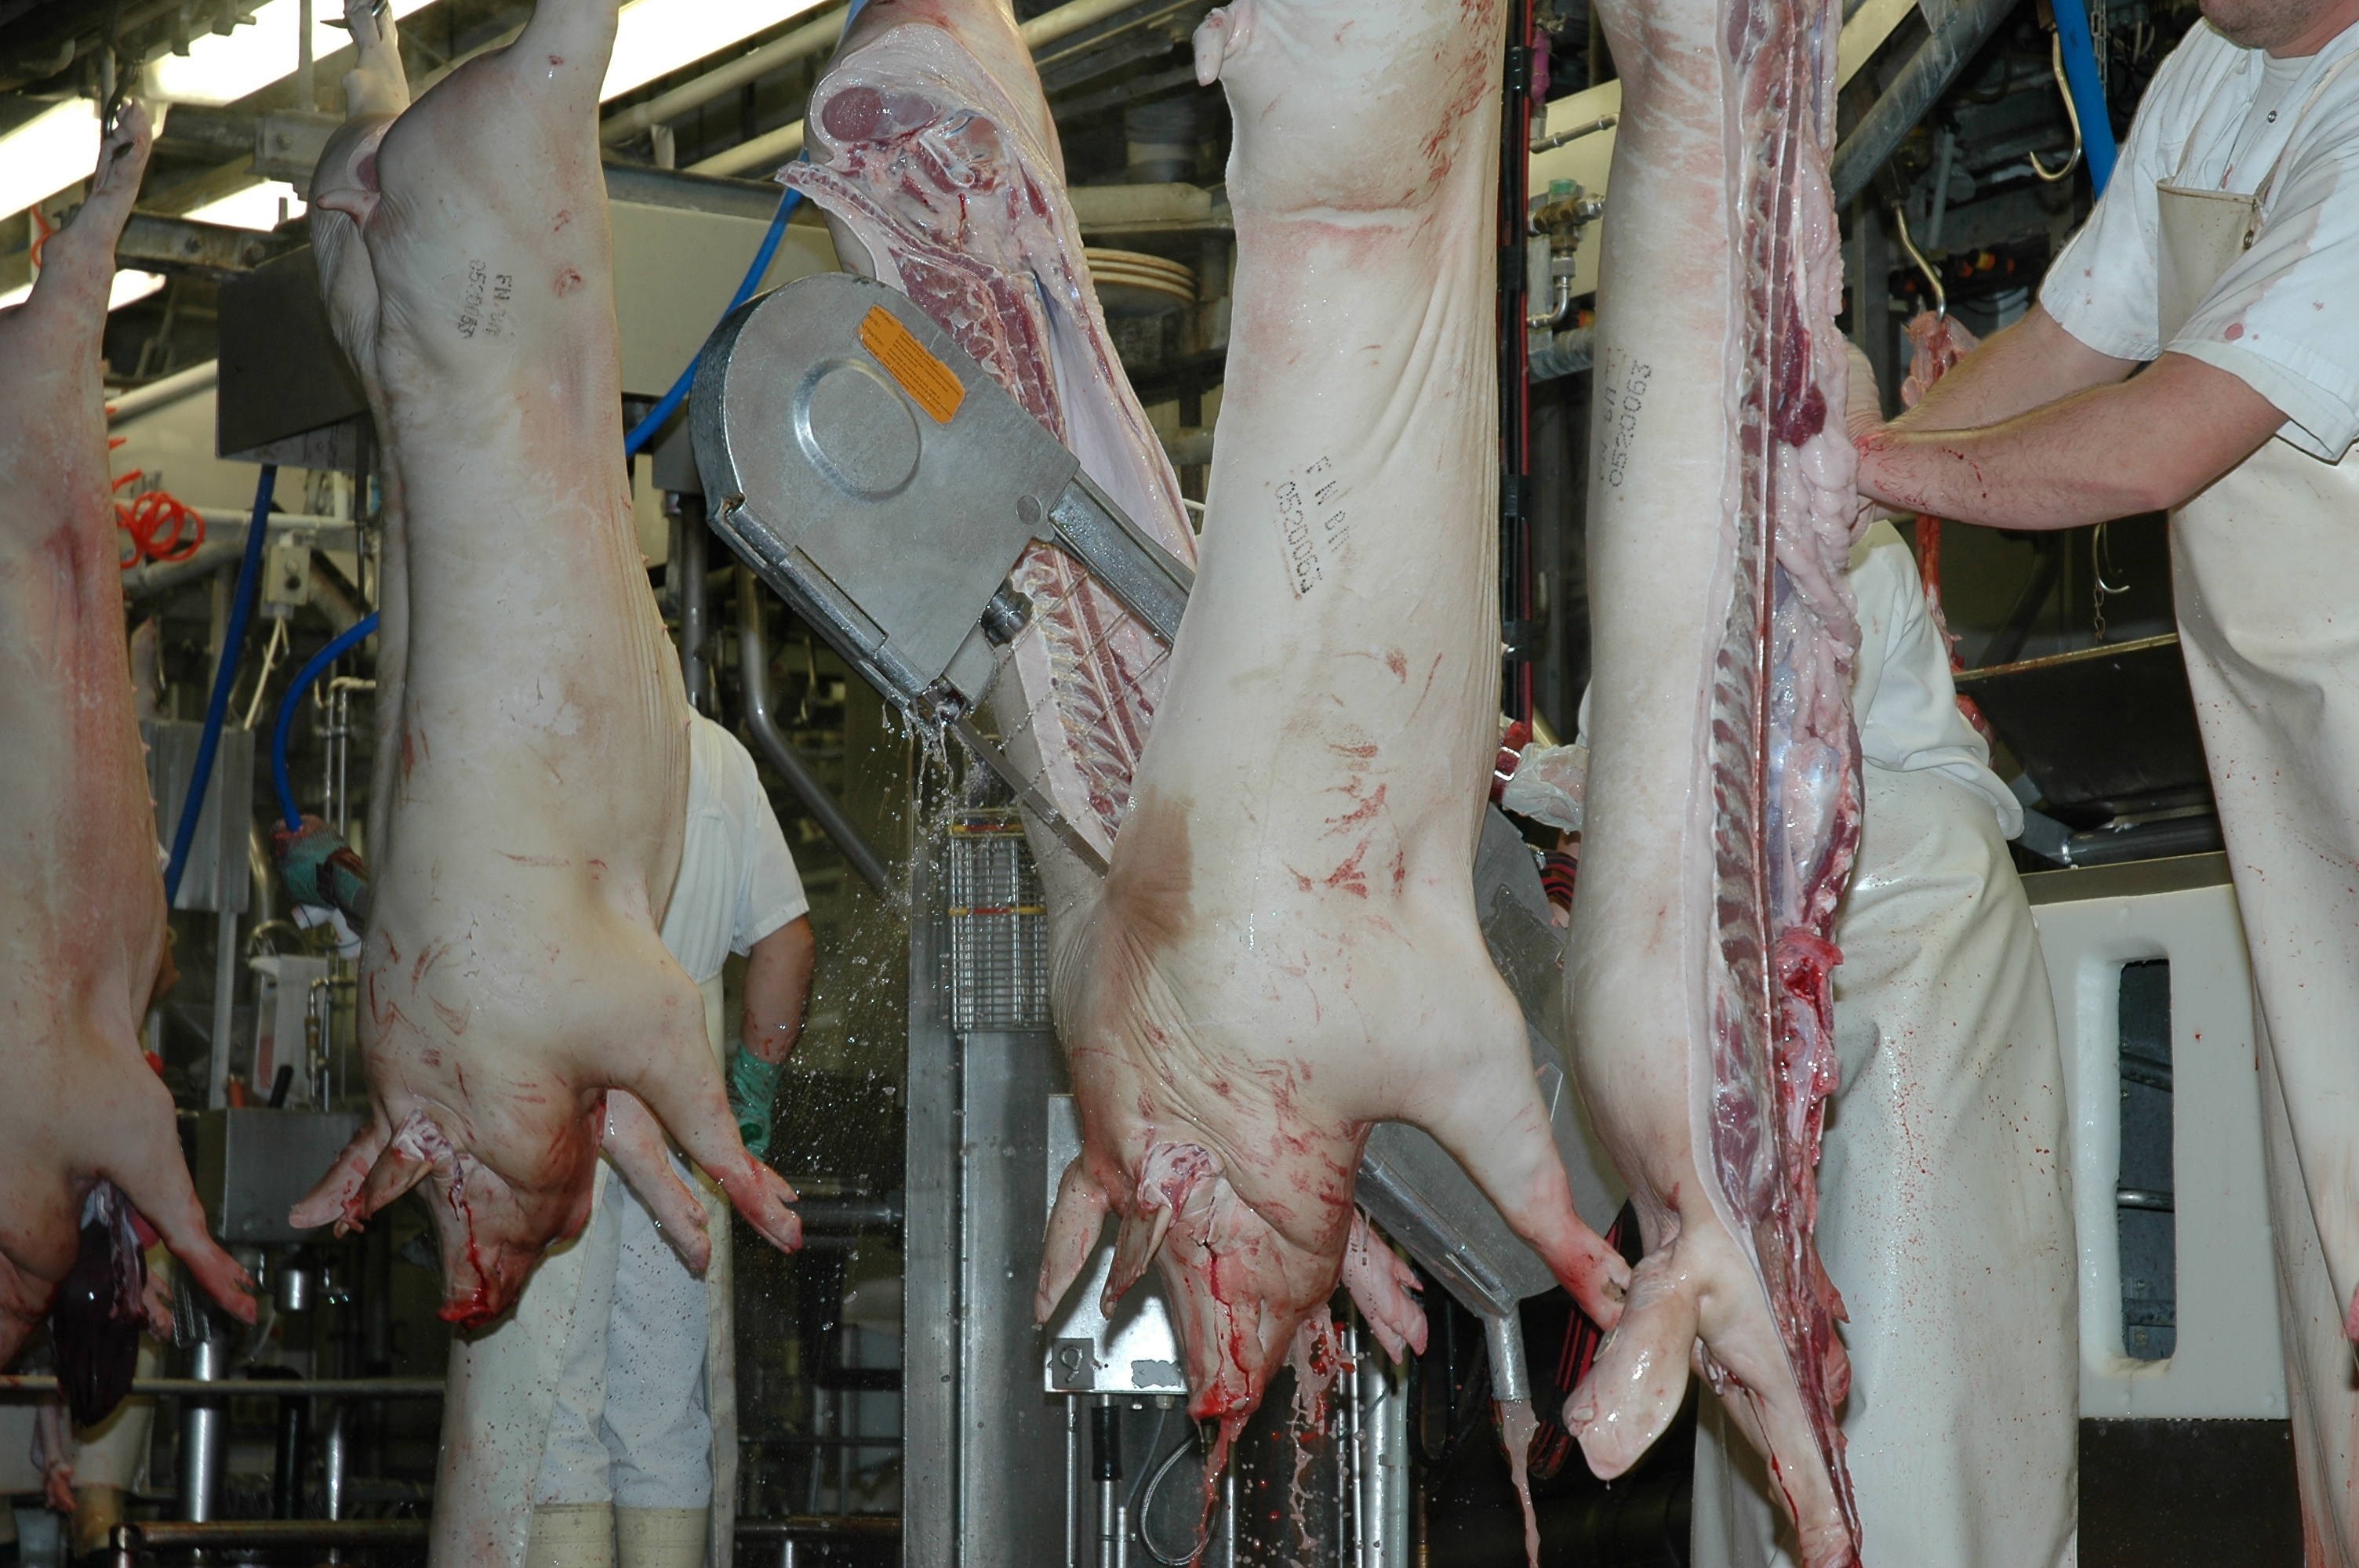 pig processing line where employees are butchering pig carcasses